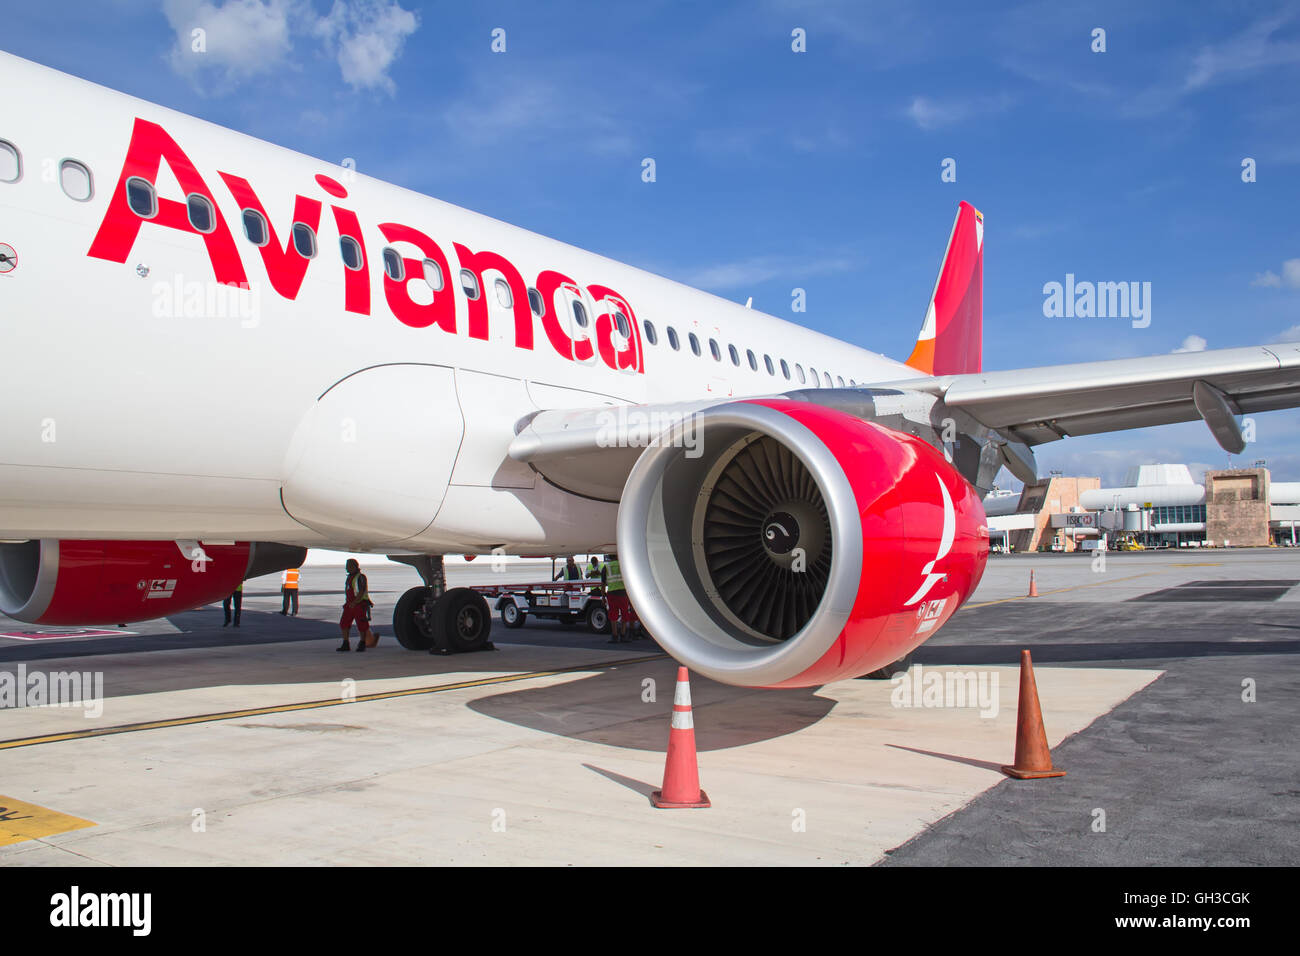 CANCUN - OCTOBER 19: Avianca A-320 disembarking passengers after arriving to Cancun on October 19, 2014 in Cancun, Mexico. Avian Stock Photo